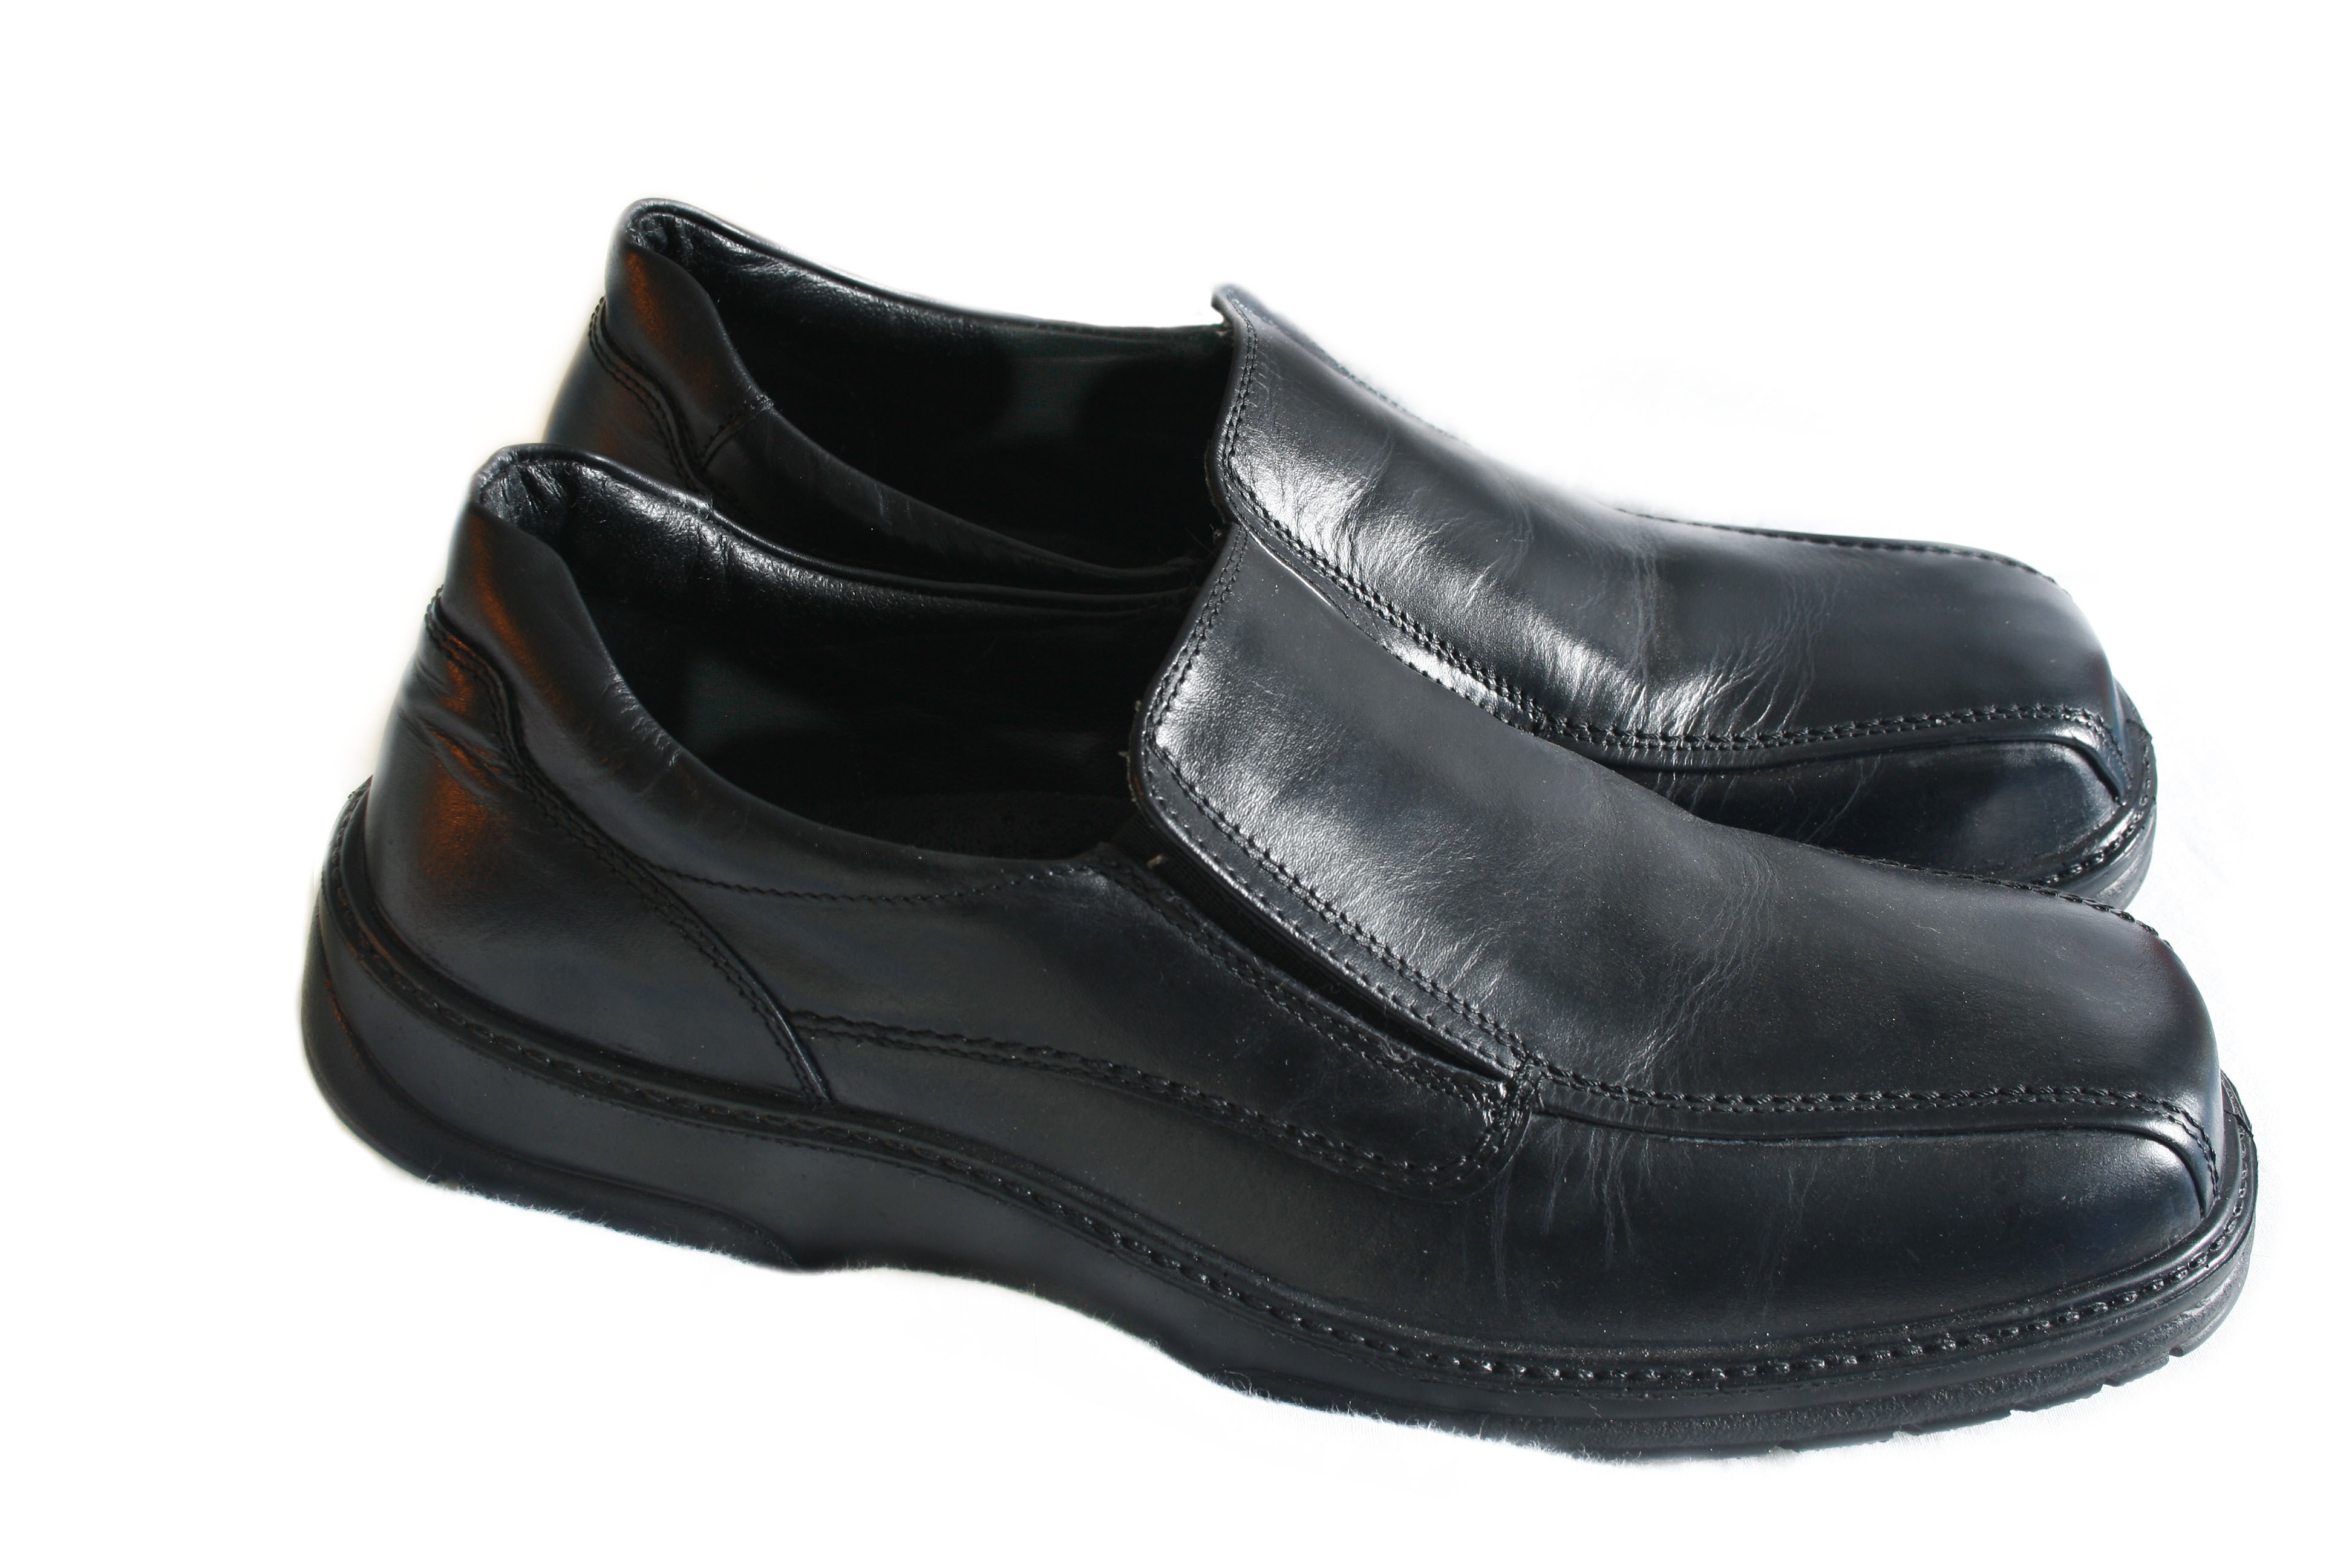 File:A pair of Blue branded black loafers.JPG - Wikimedia Commons